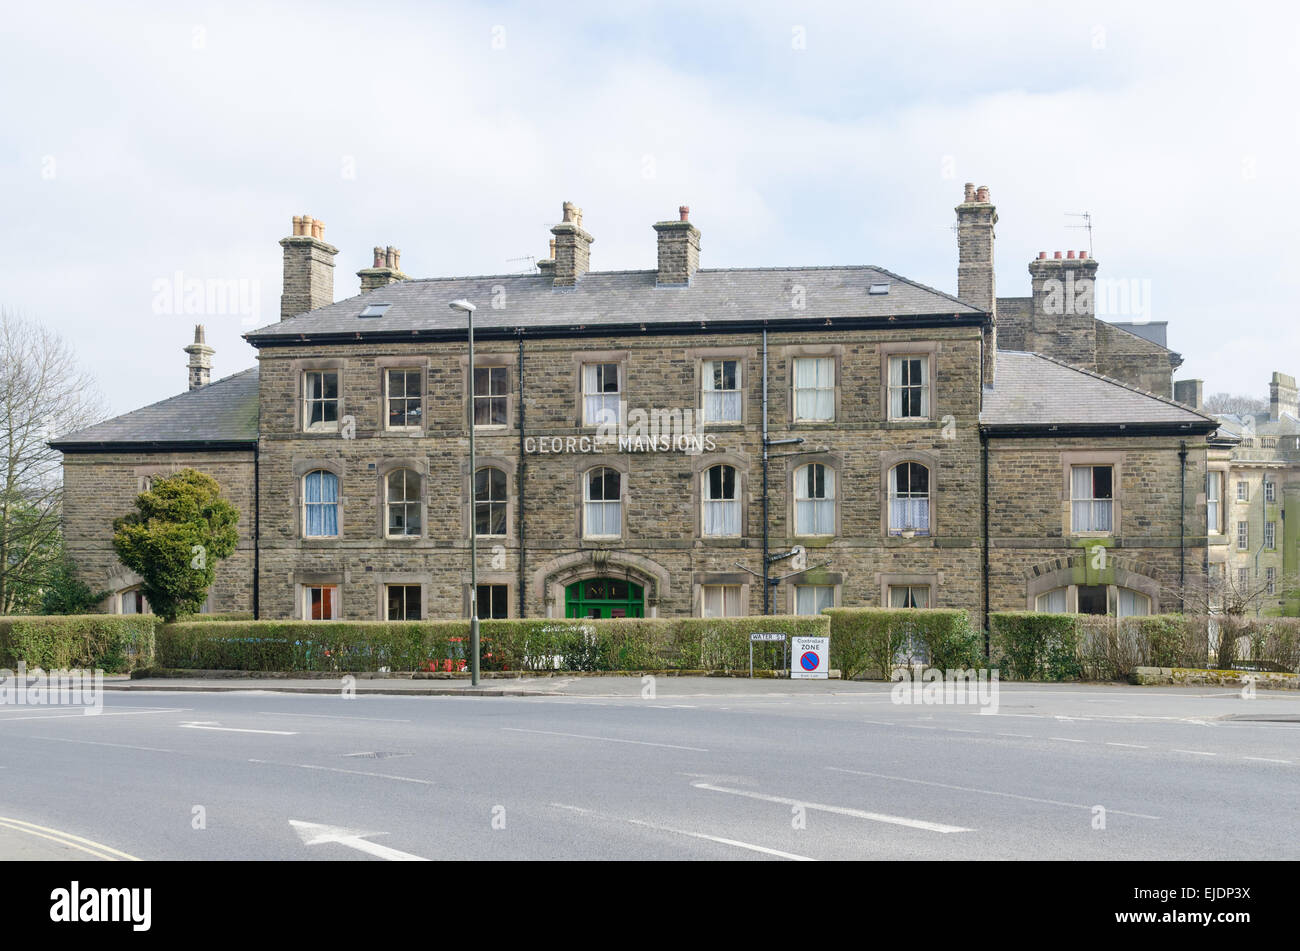 George Mansions, Grade 2 listed building in the Derbyshire spa town of Buxton Stock Photo